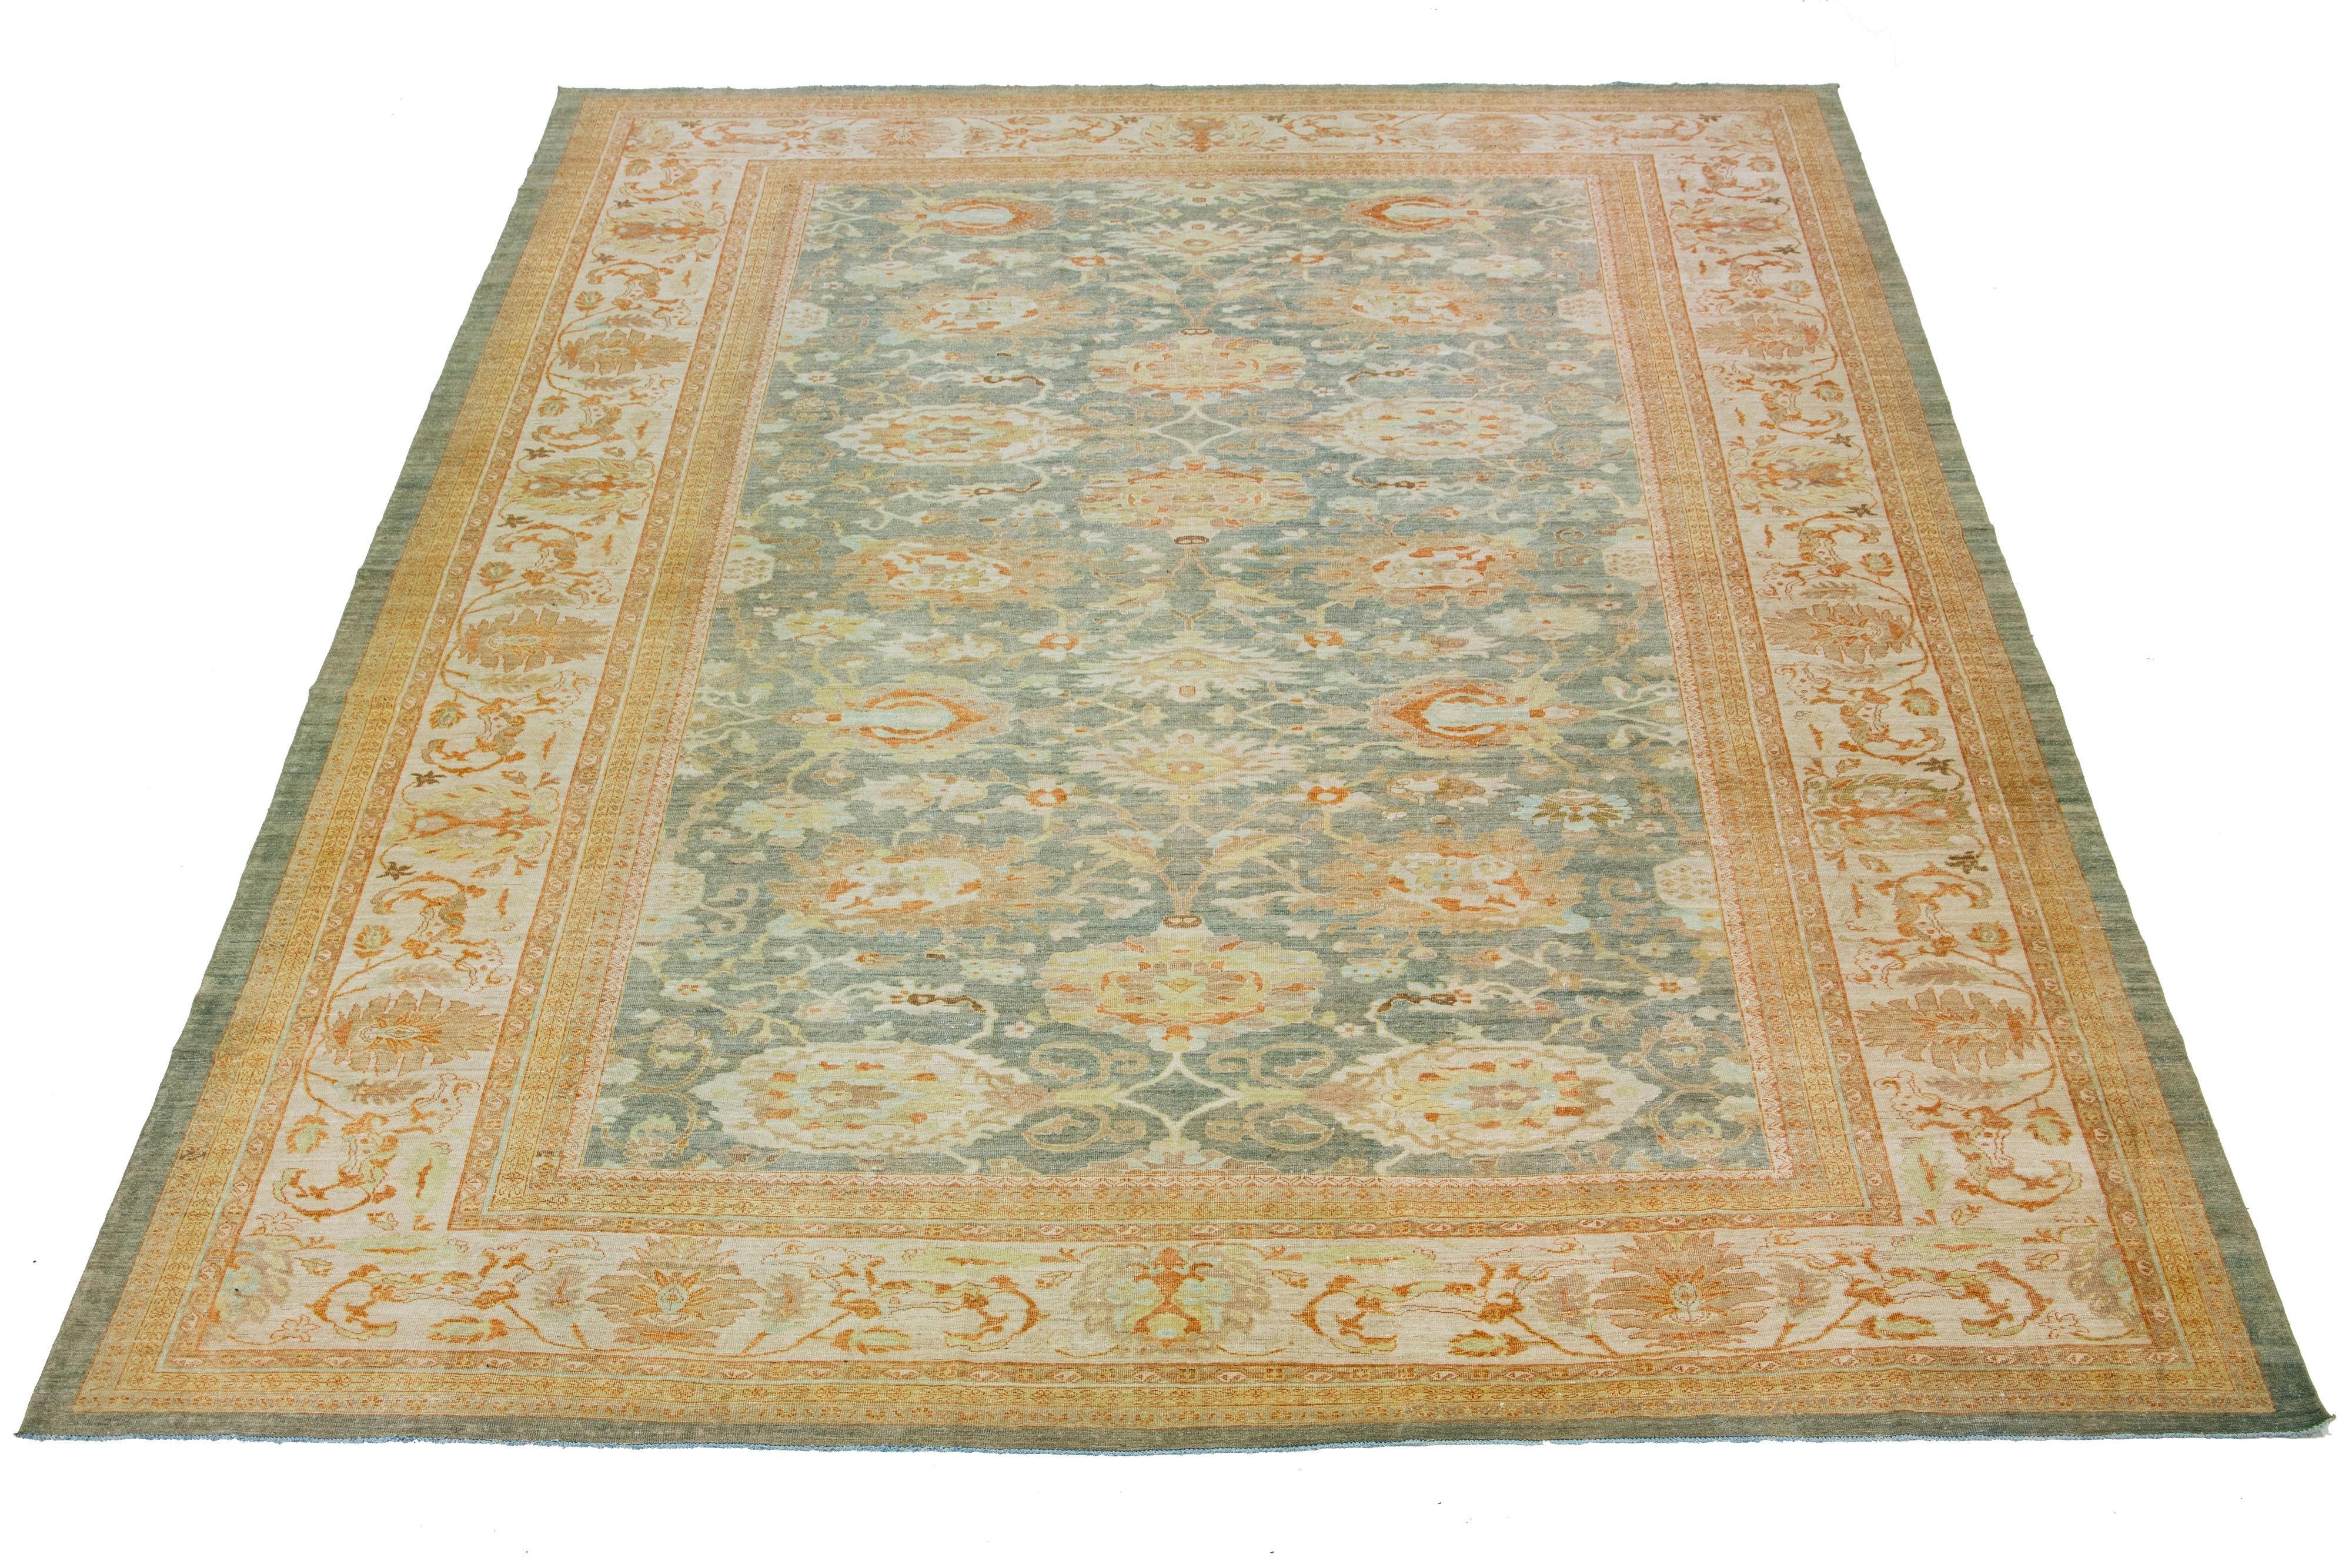 Beautiful antique Persian hand-knotted wool rug with a light blue color field. This piece has a beige frame with orange and green accents in a gorgeous all-over floral design.

This rug measures 13'8